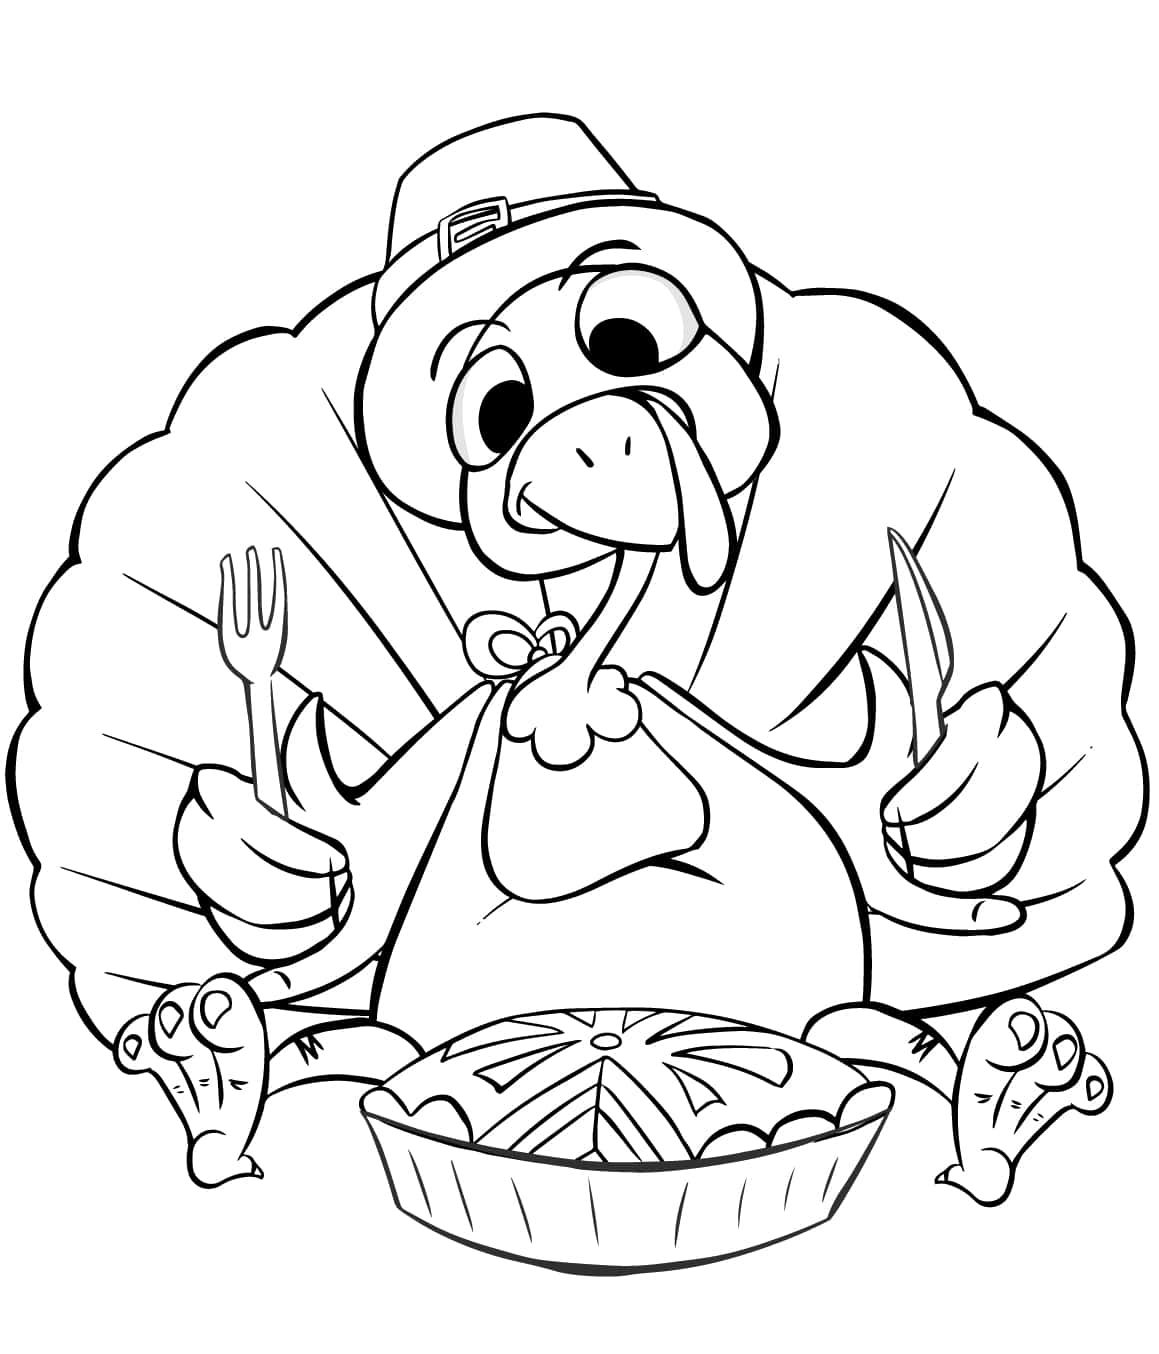 Get ready for Thanksgiving with coloring!